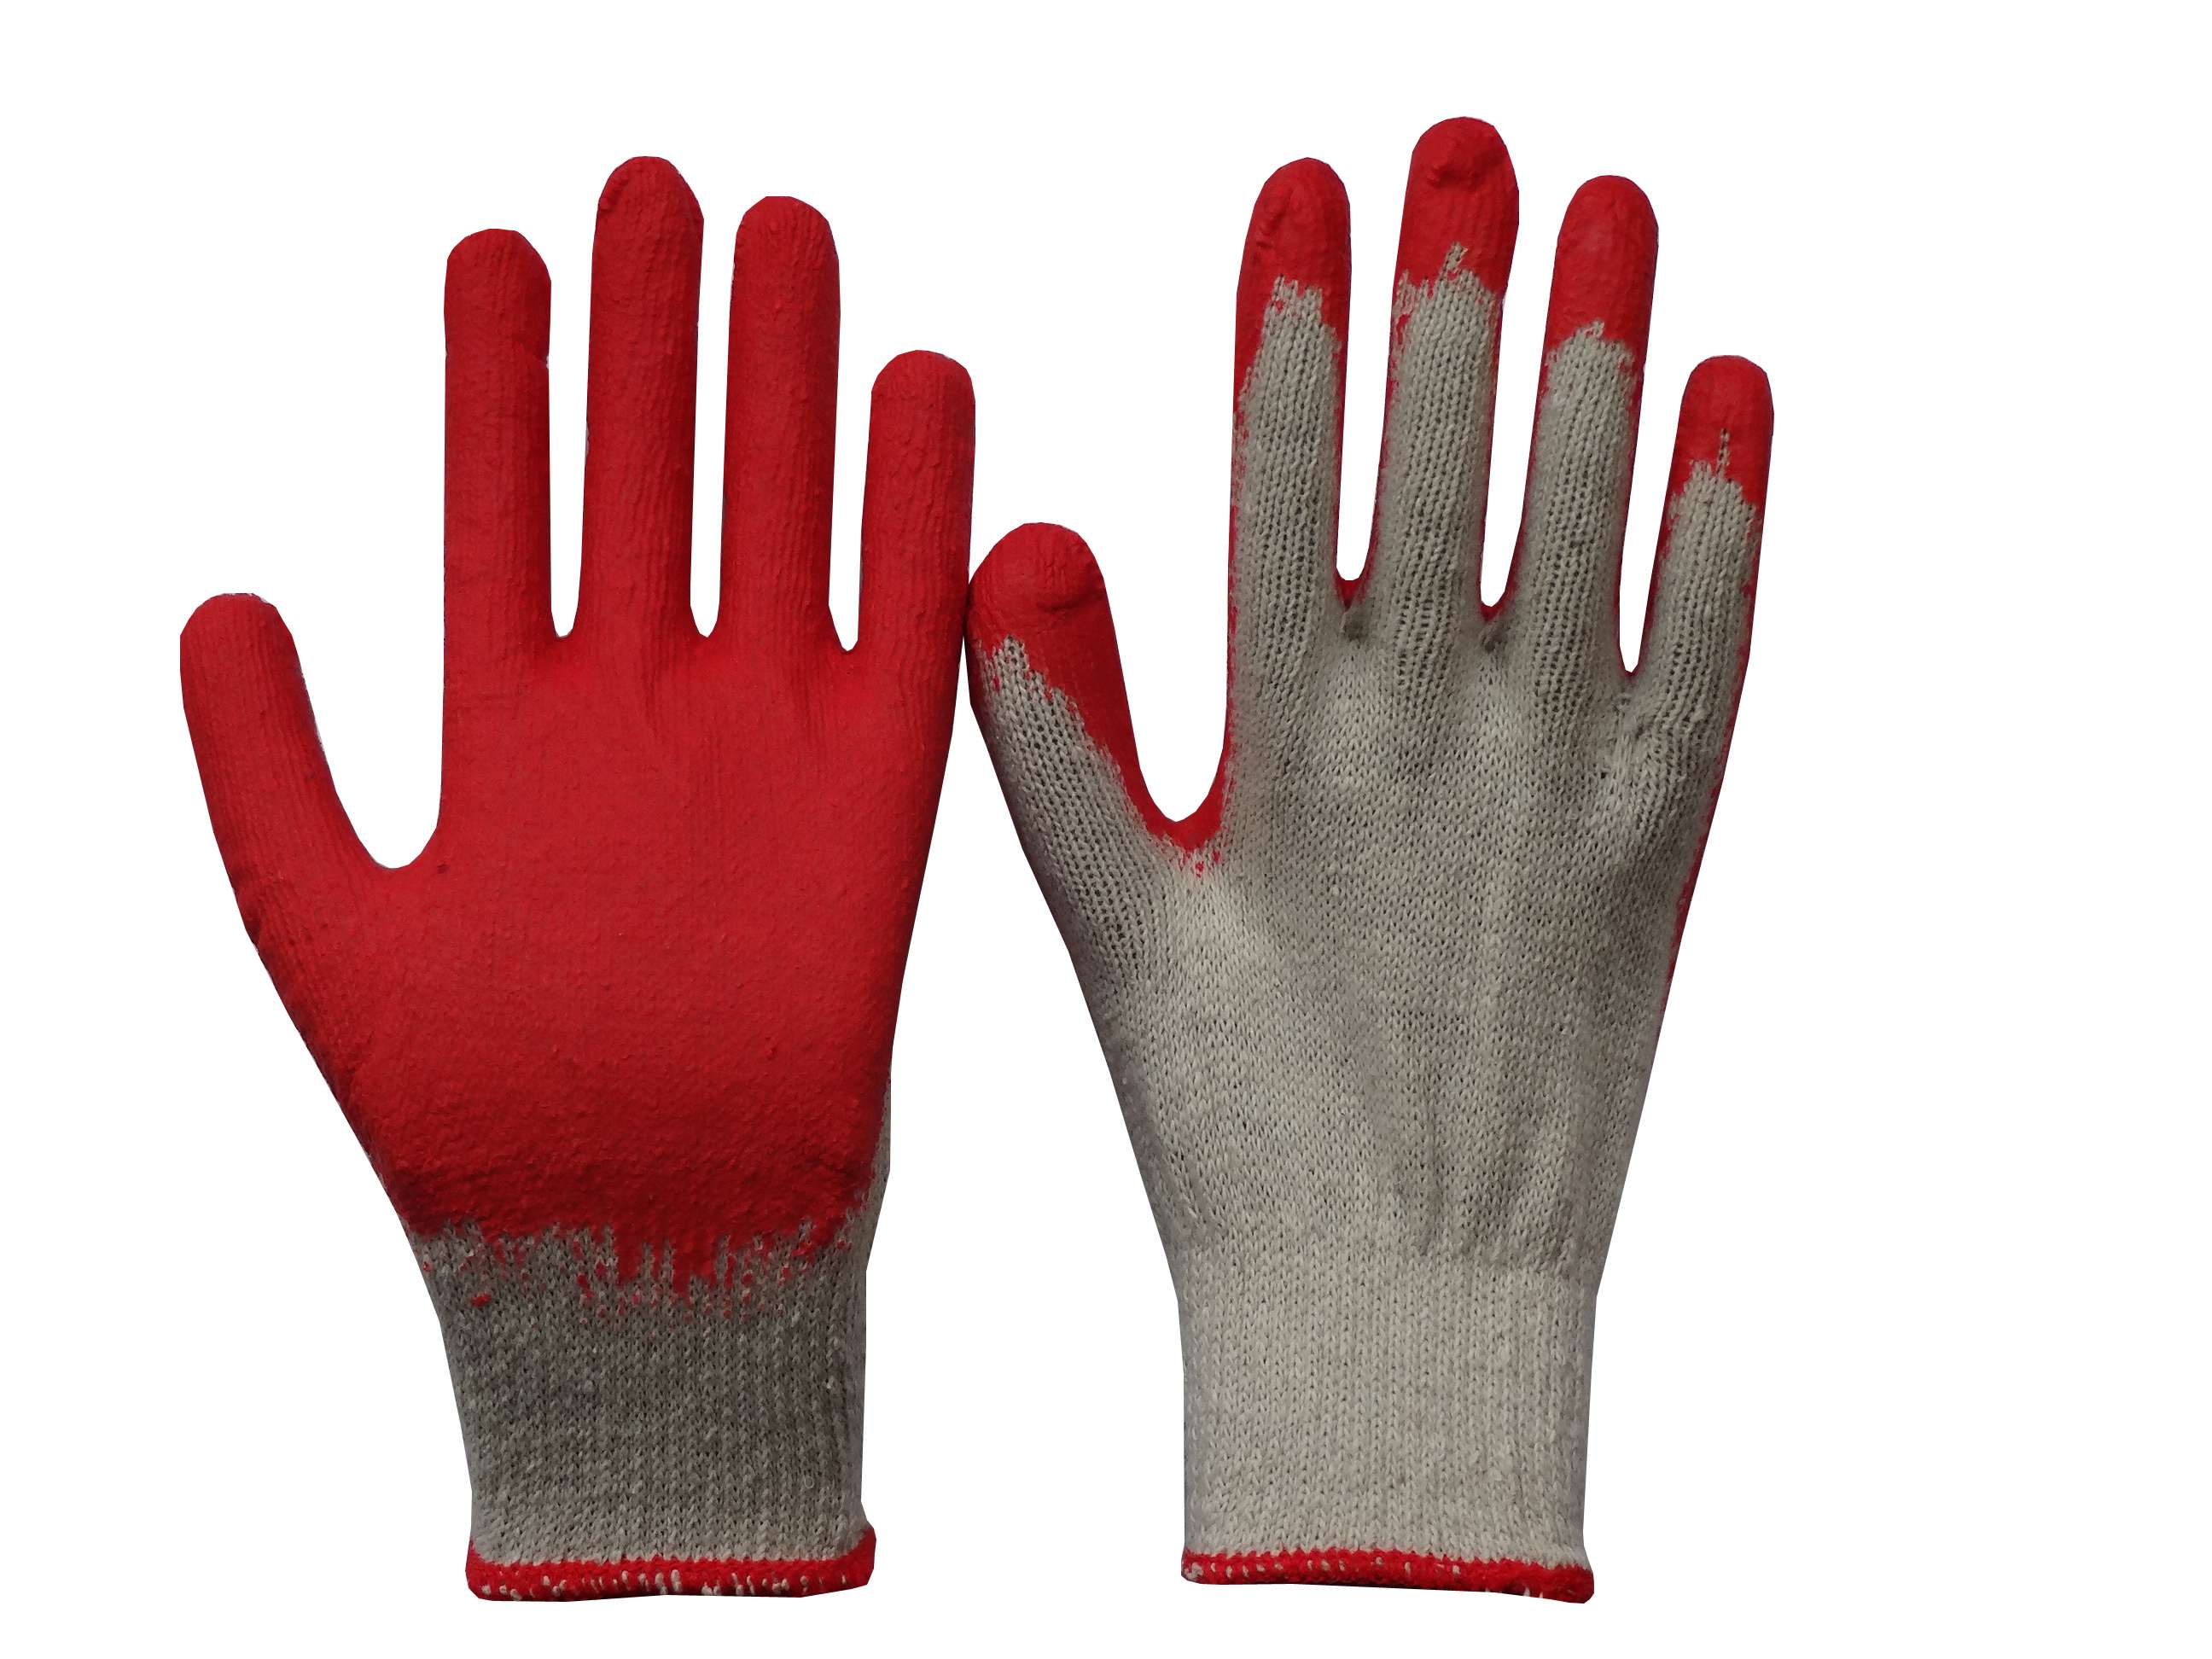 Large White Cotton String Knit Work Gloves with Red Latex Dip Palm, 10 Pairs/Pack, 30 Pack/Box - 1